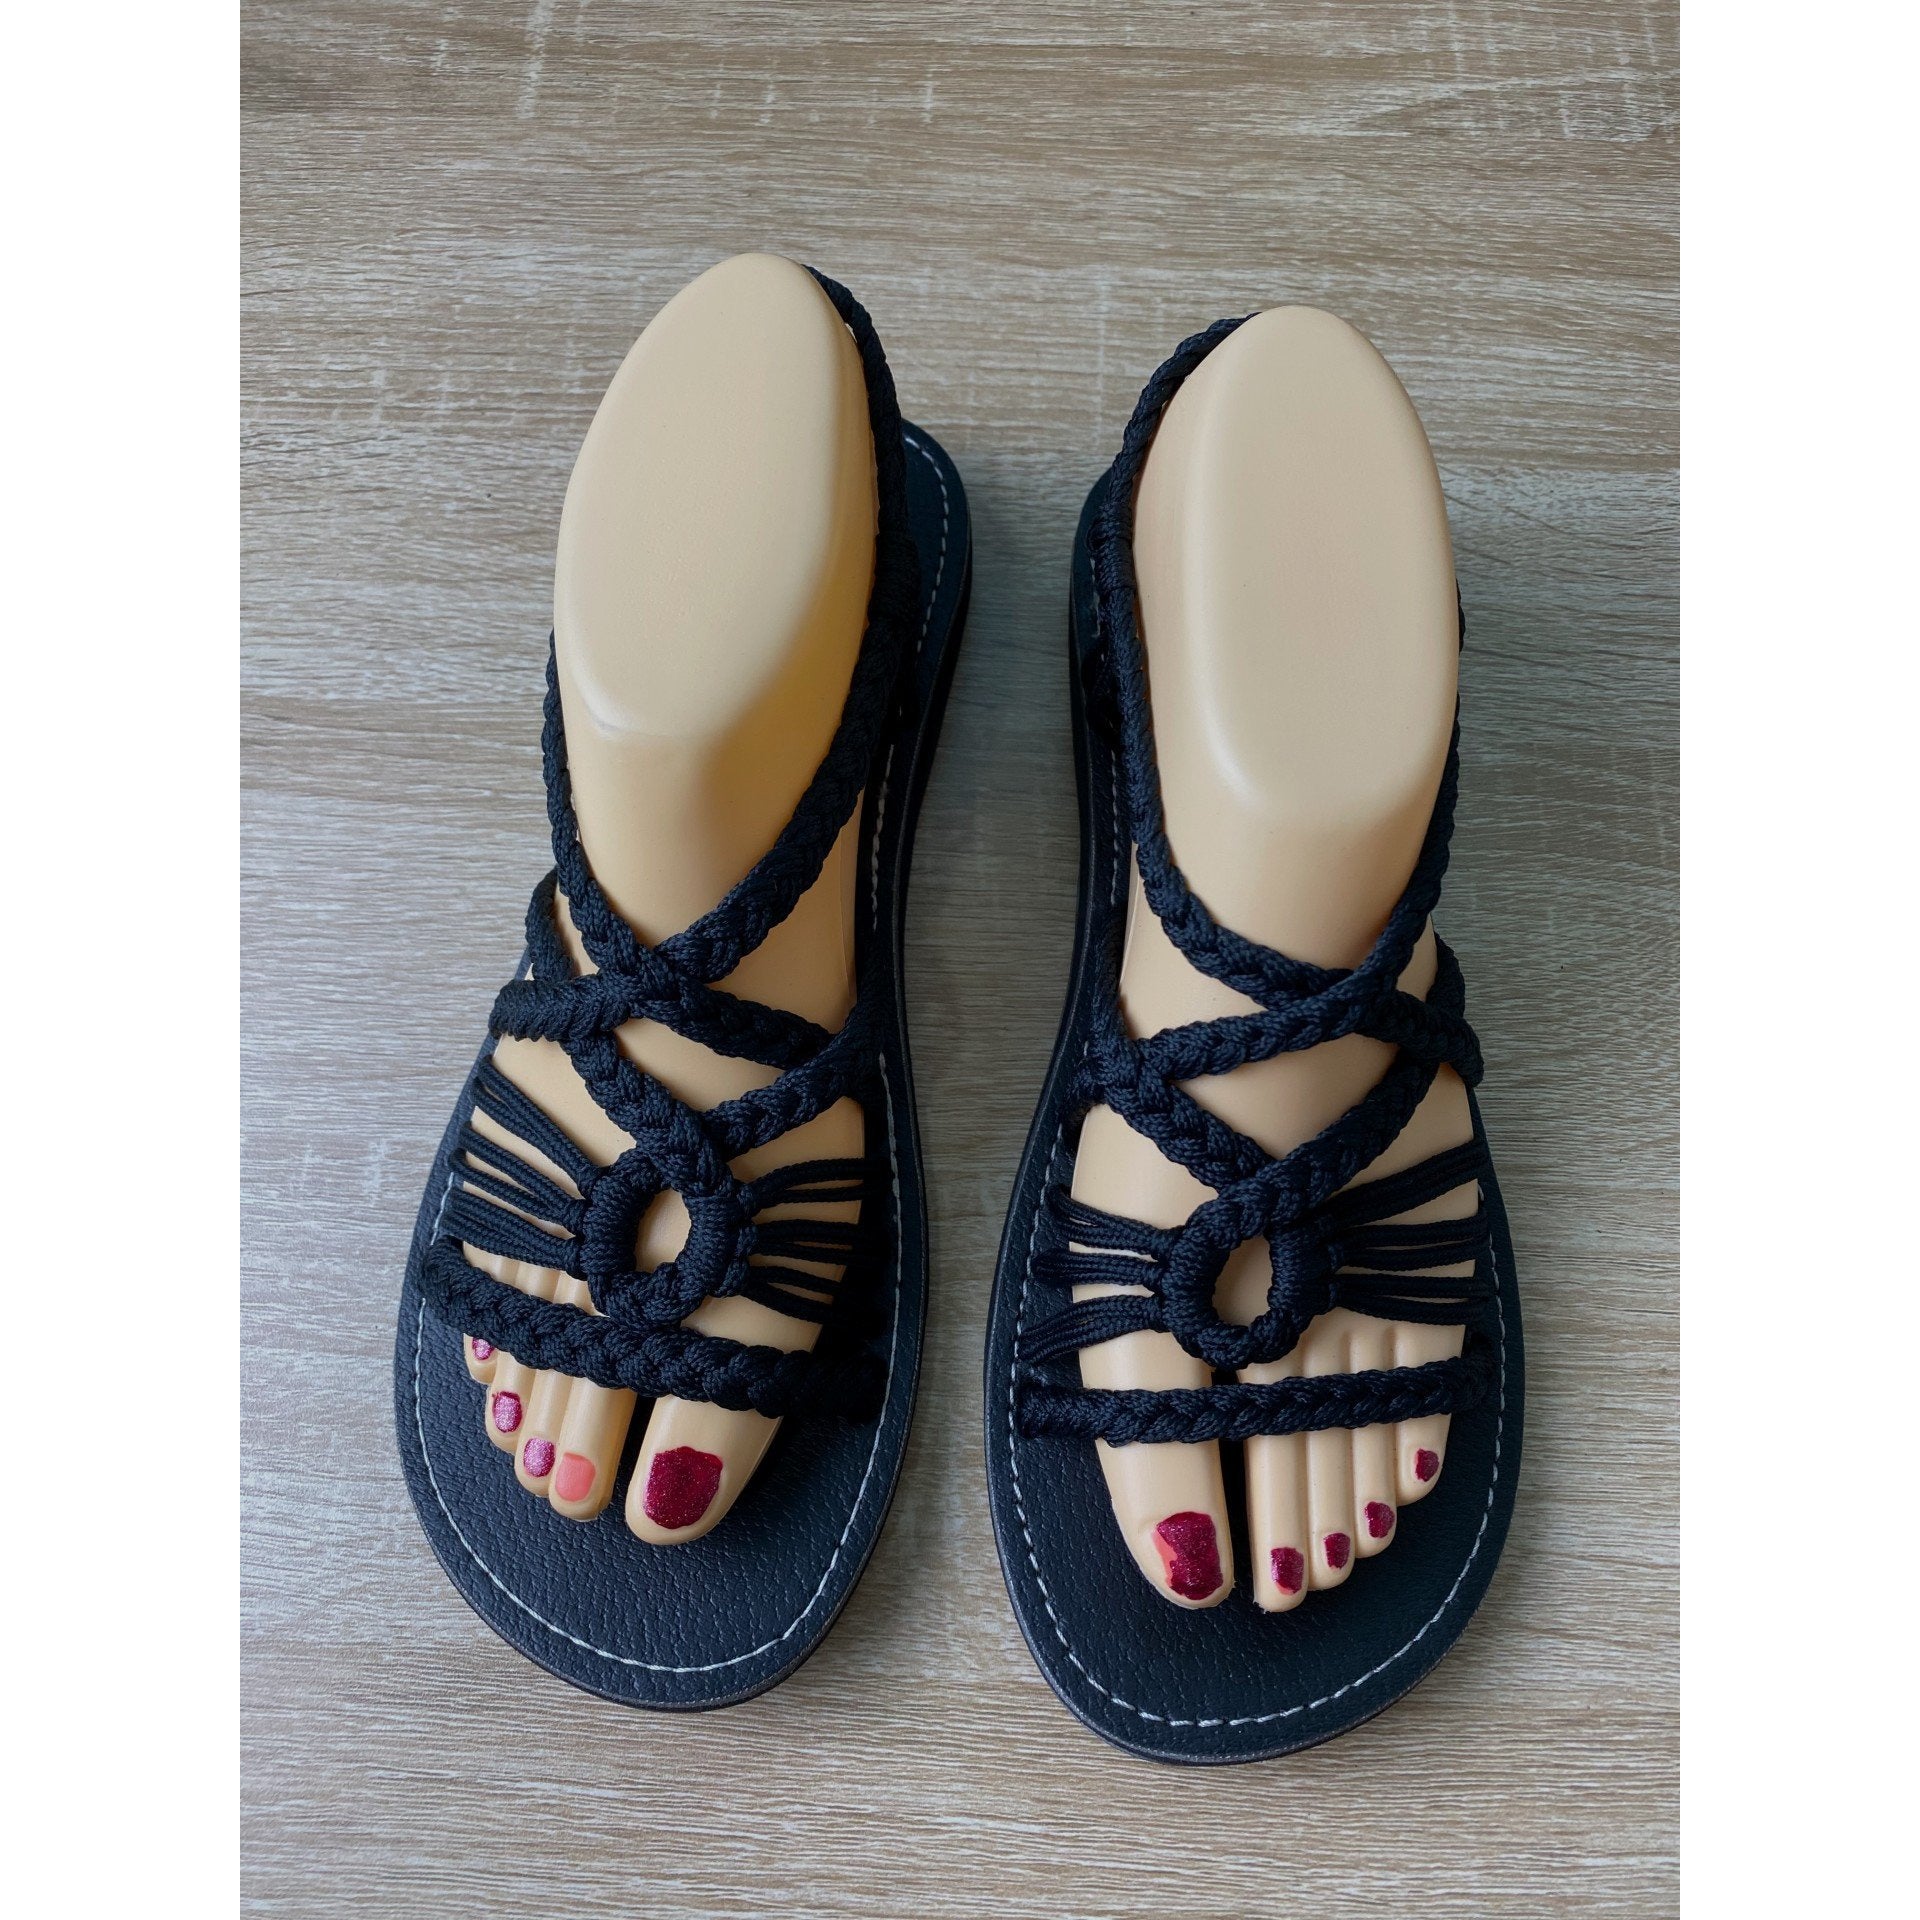 Shoes - Braided Sandals BL